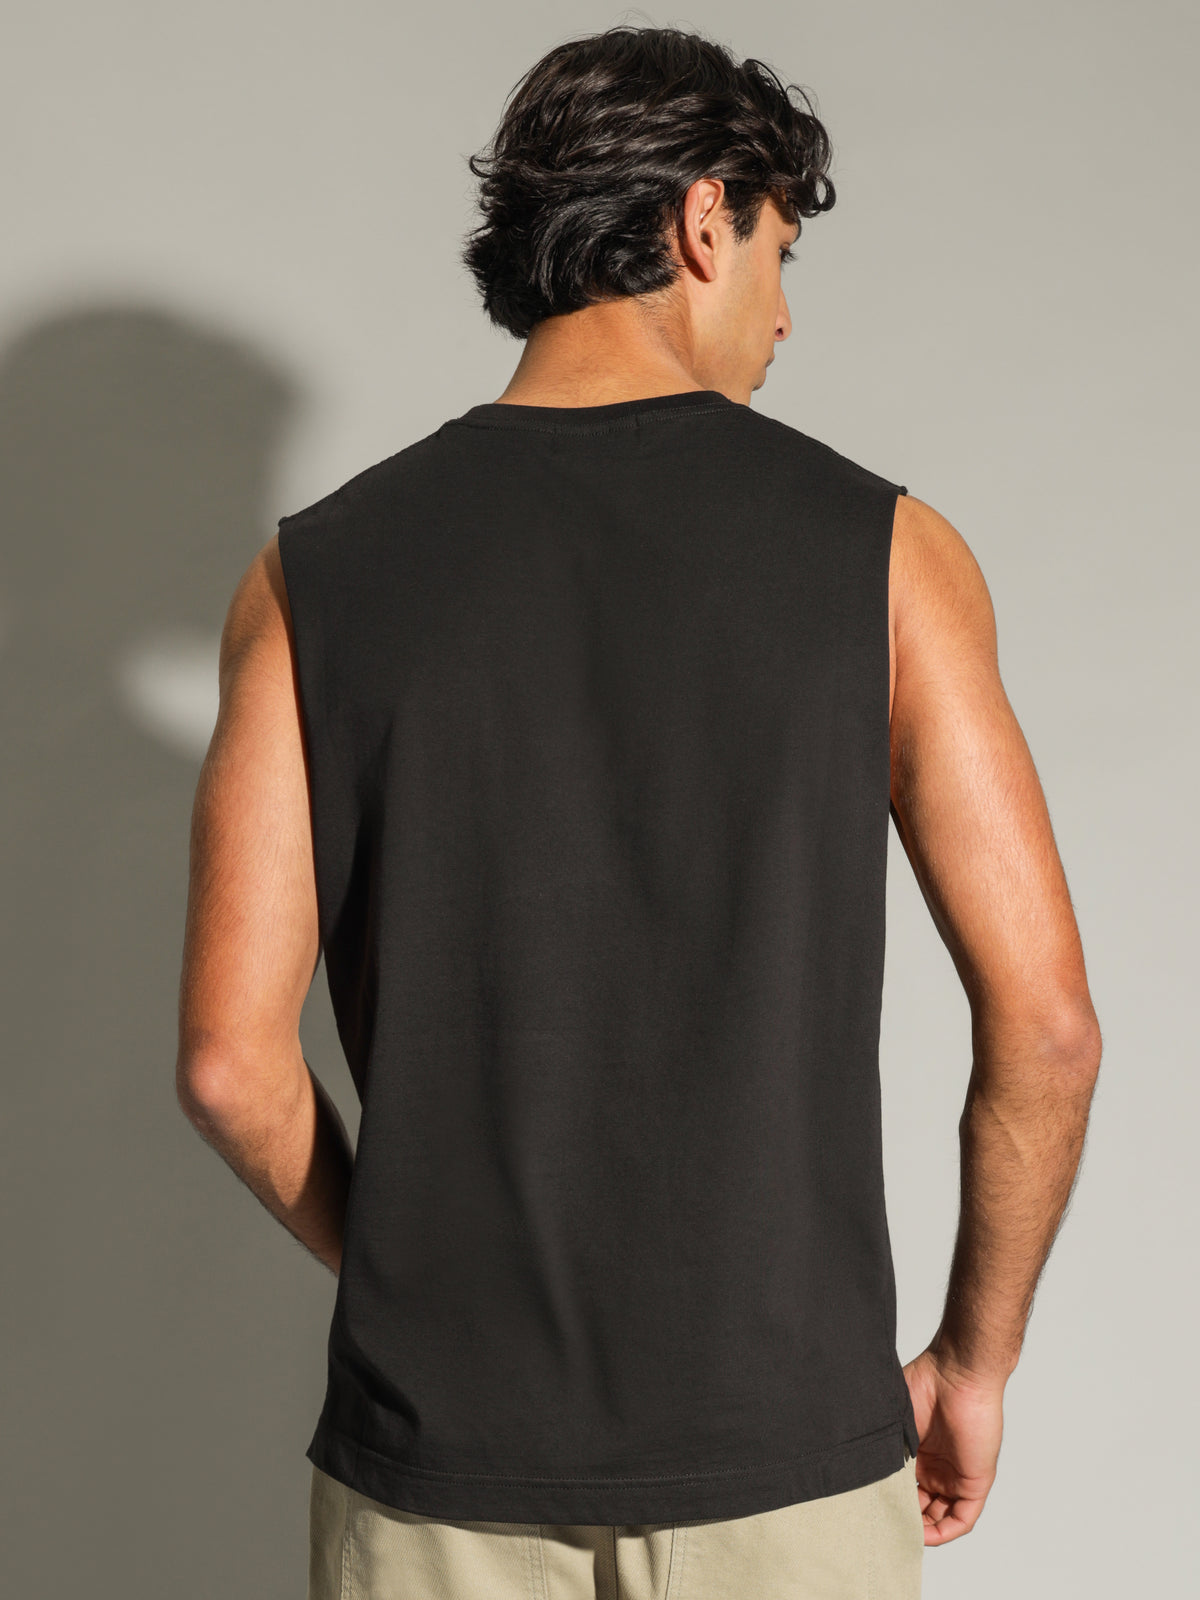 Classic Muscle Tank in Black